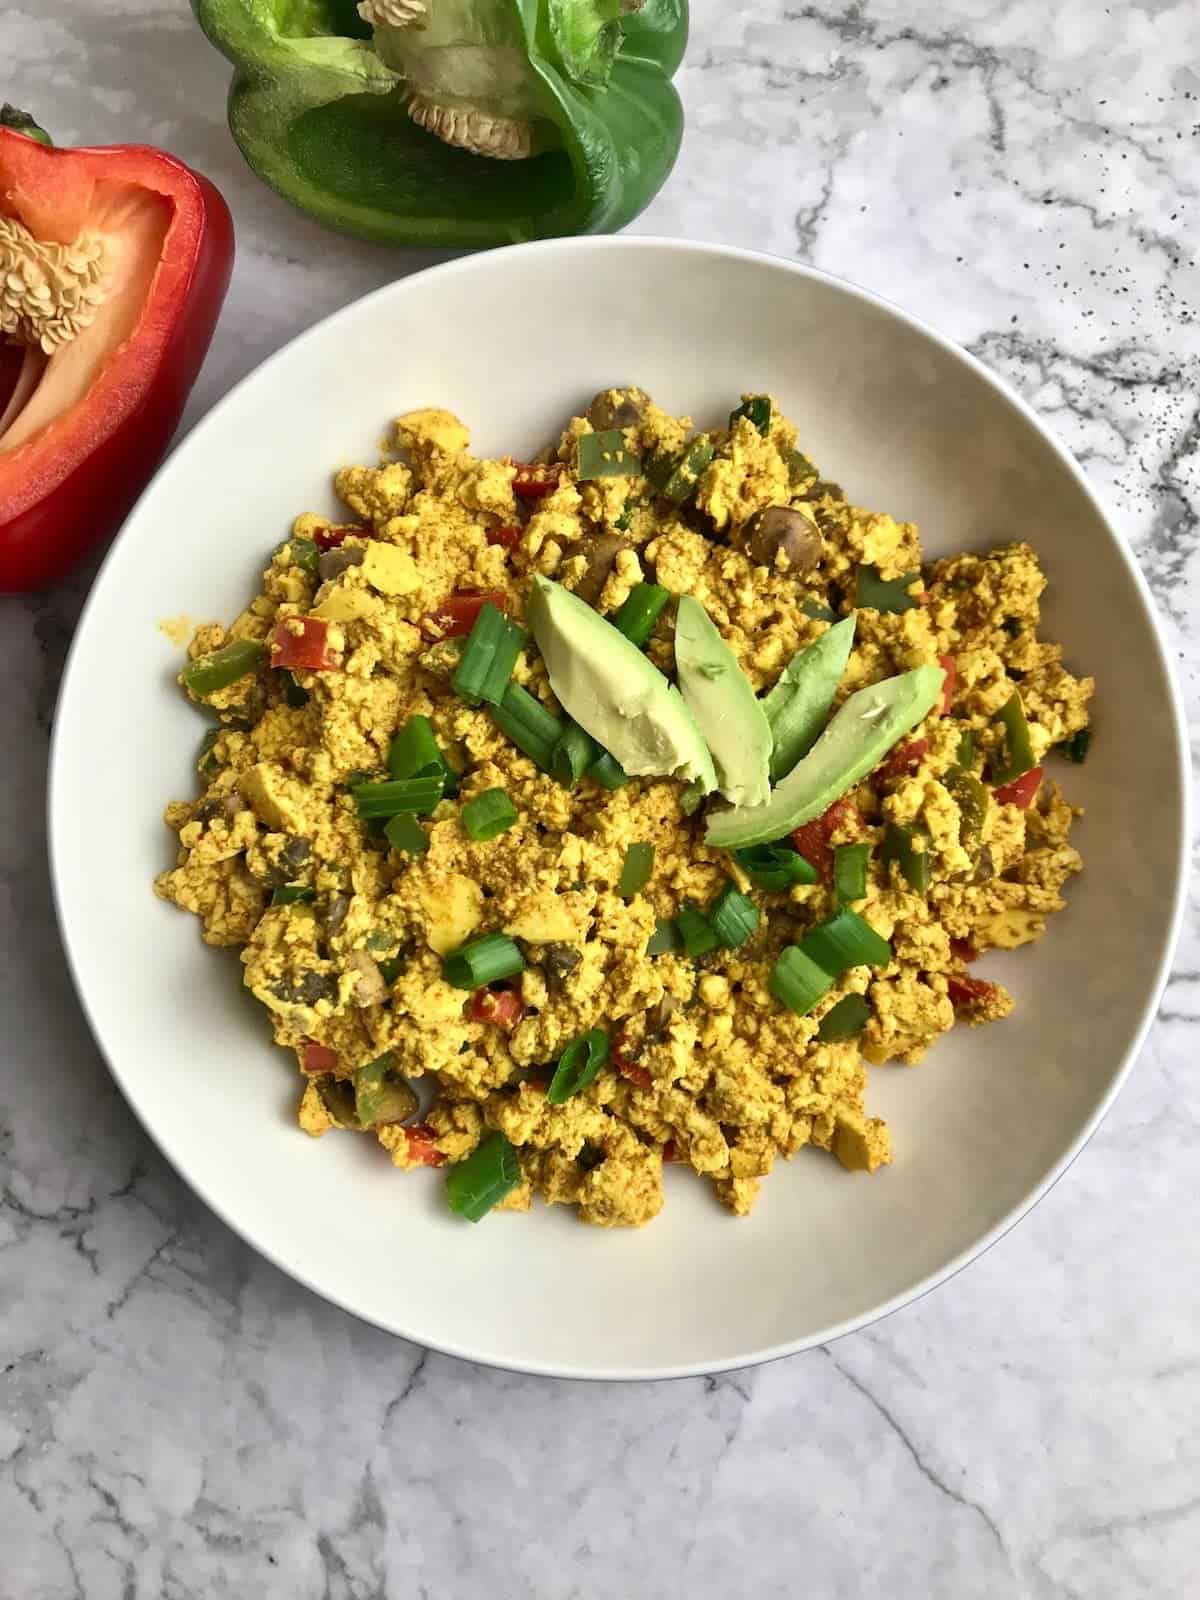 A high protein breakfast recipe consisting of scrambled eggs with avocado and peppers.